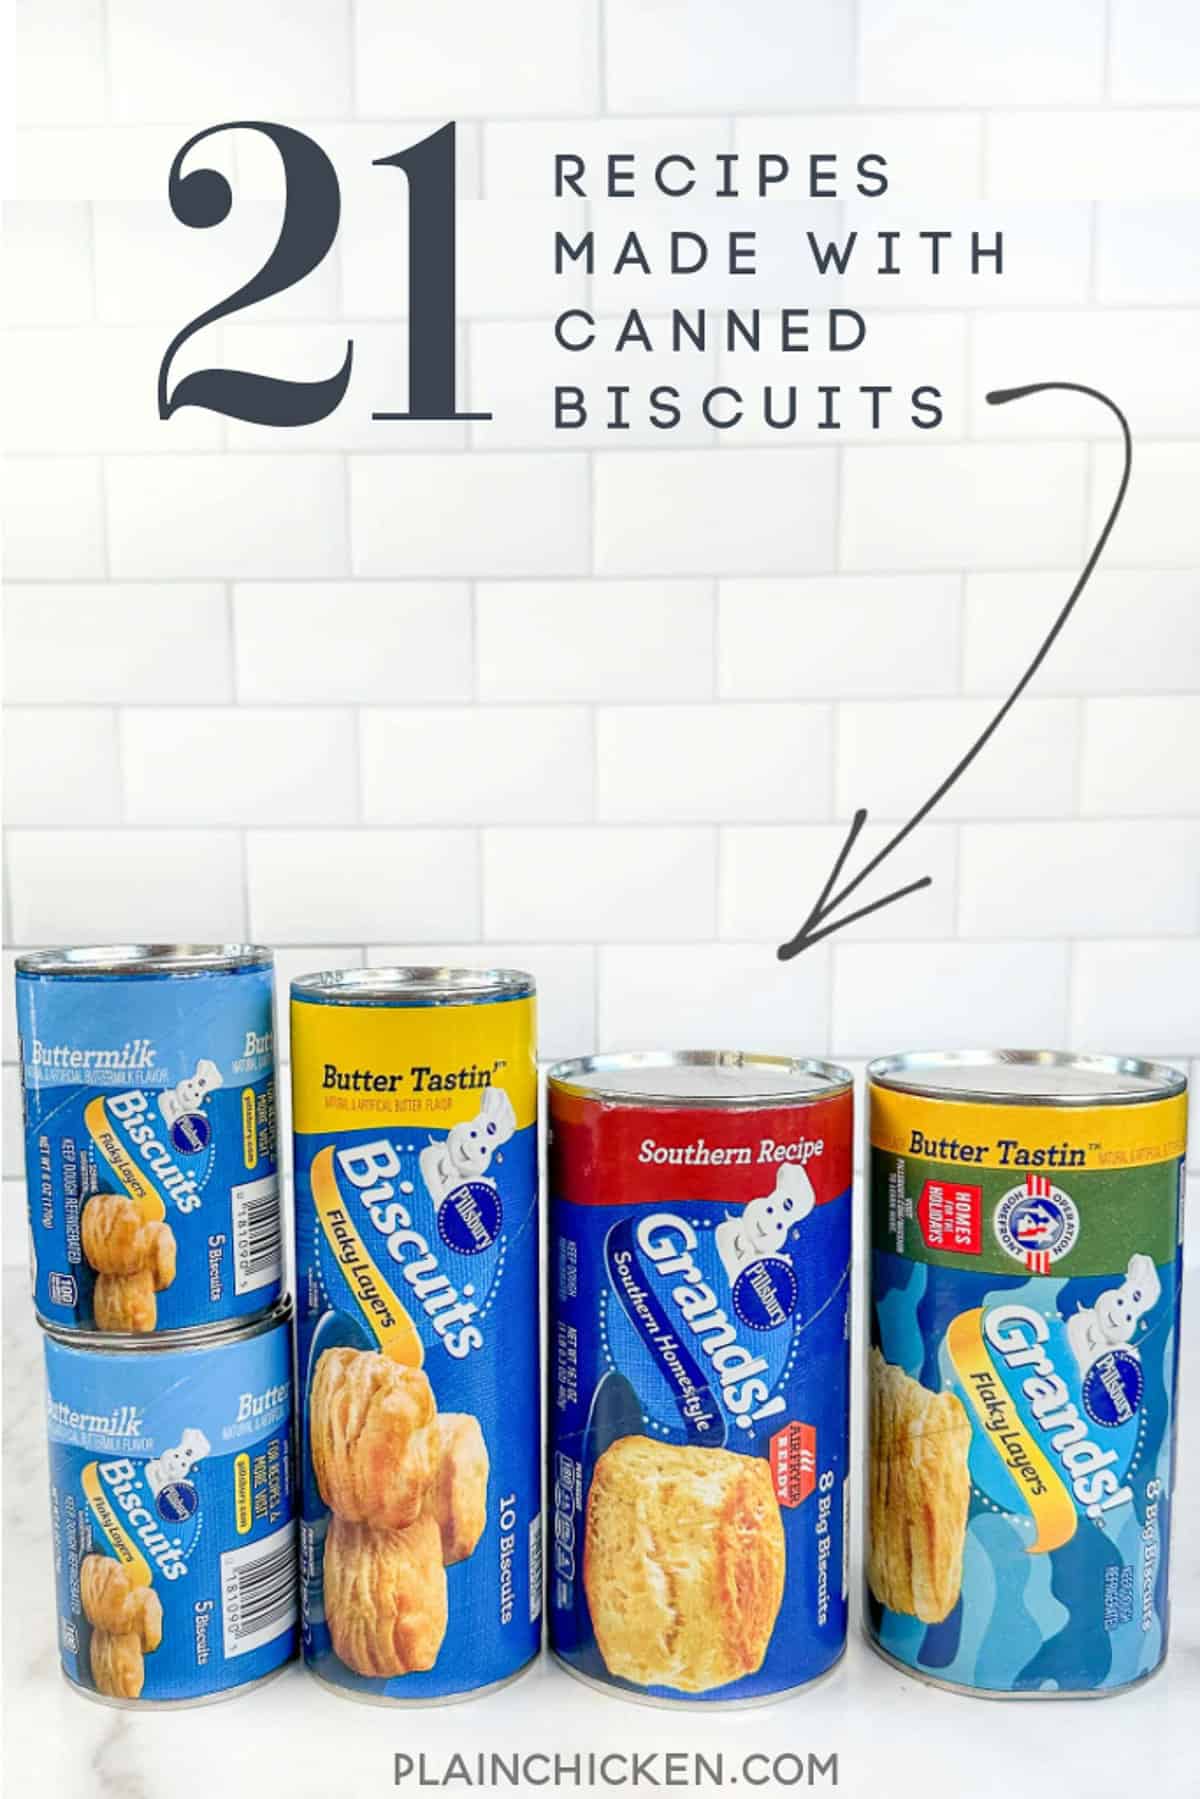 photo of 4 cans of biscuits with text overlay